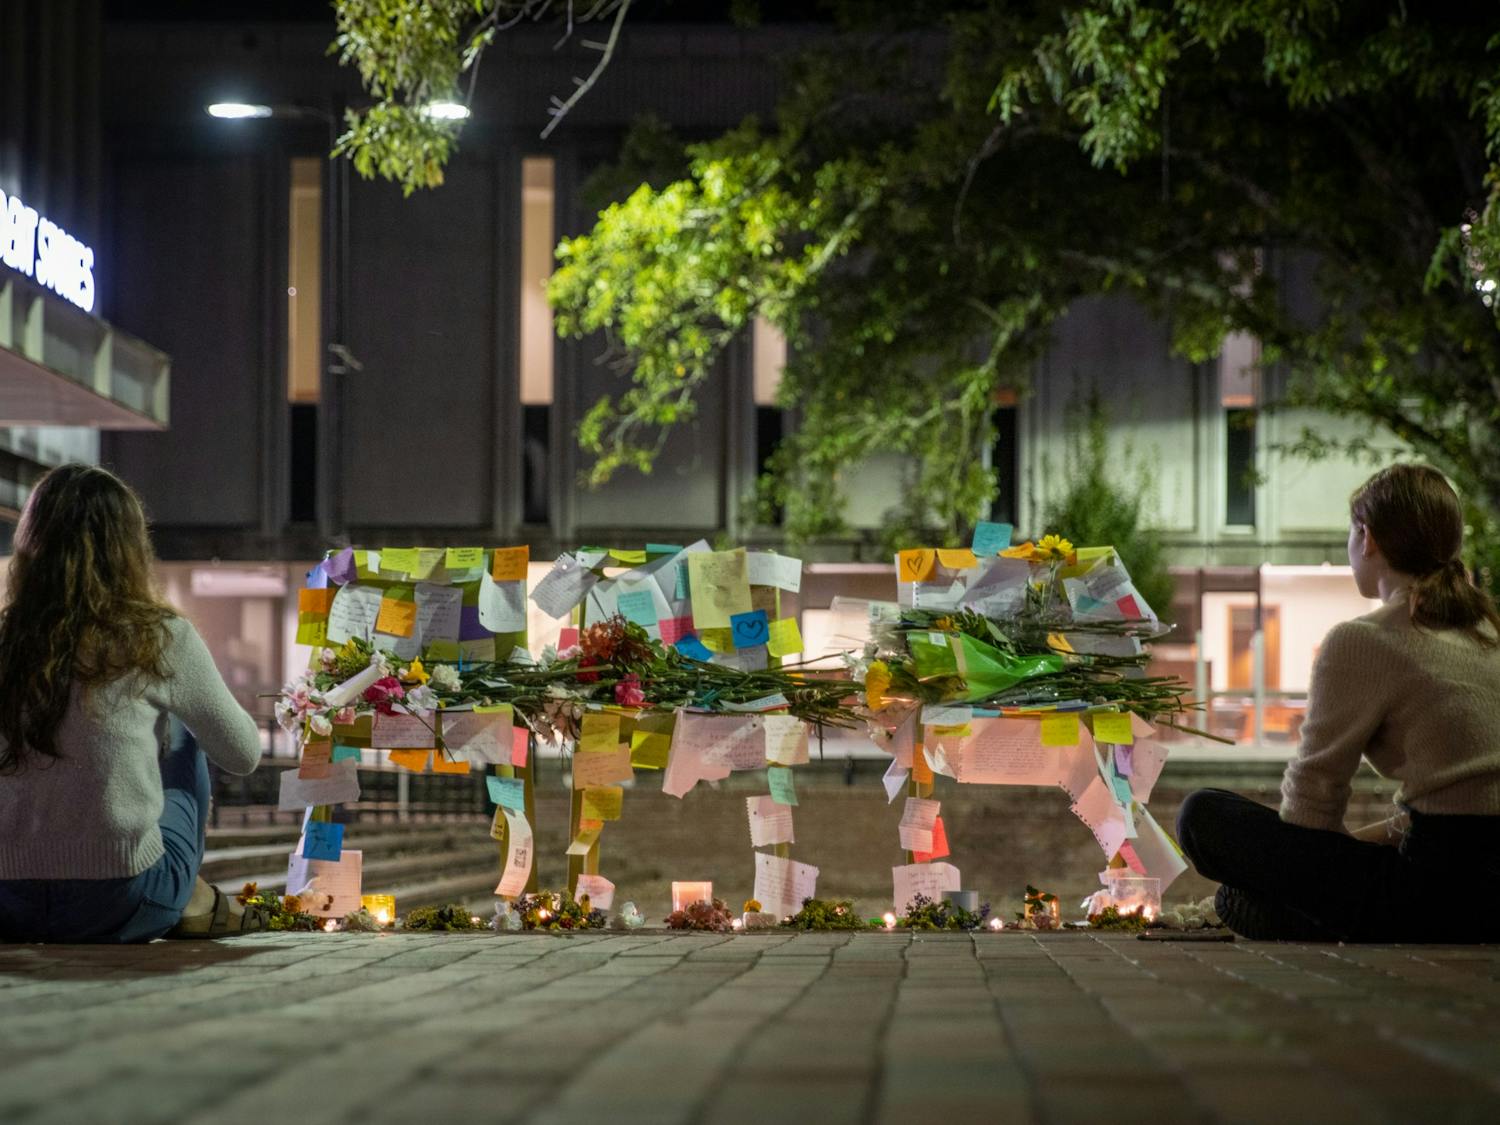 A makeshift memorial was set up in the Pit on Monday as students and faculty mourned the losses of the weekend. Passersby left notes of encouragement and flowers.